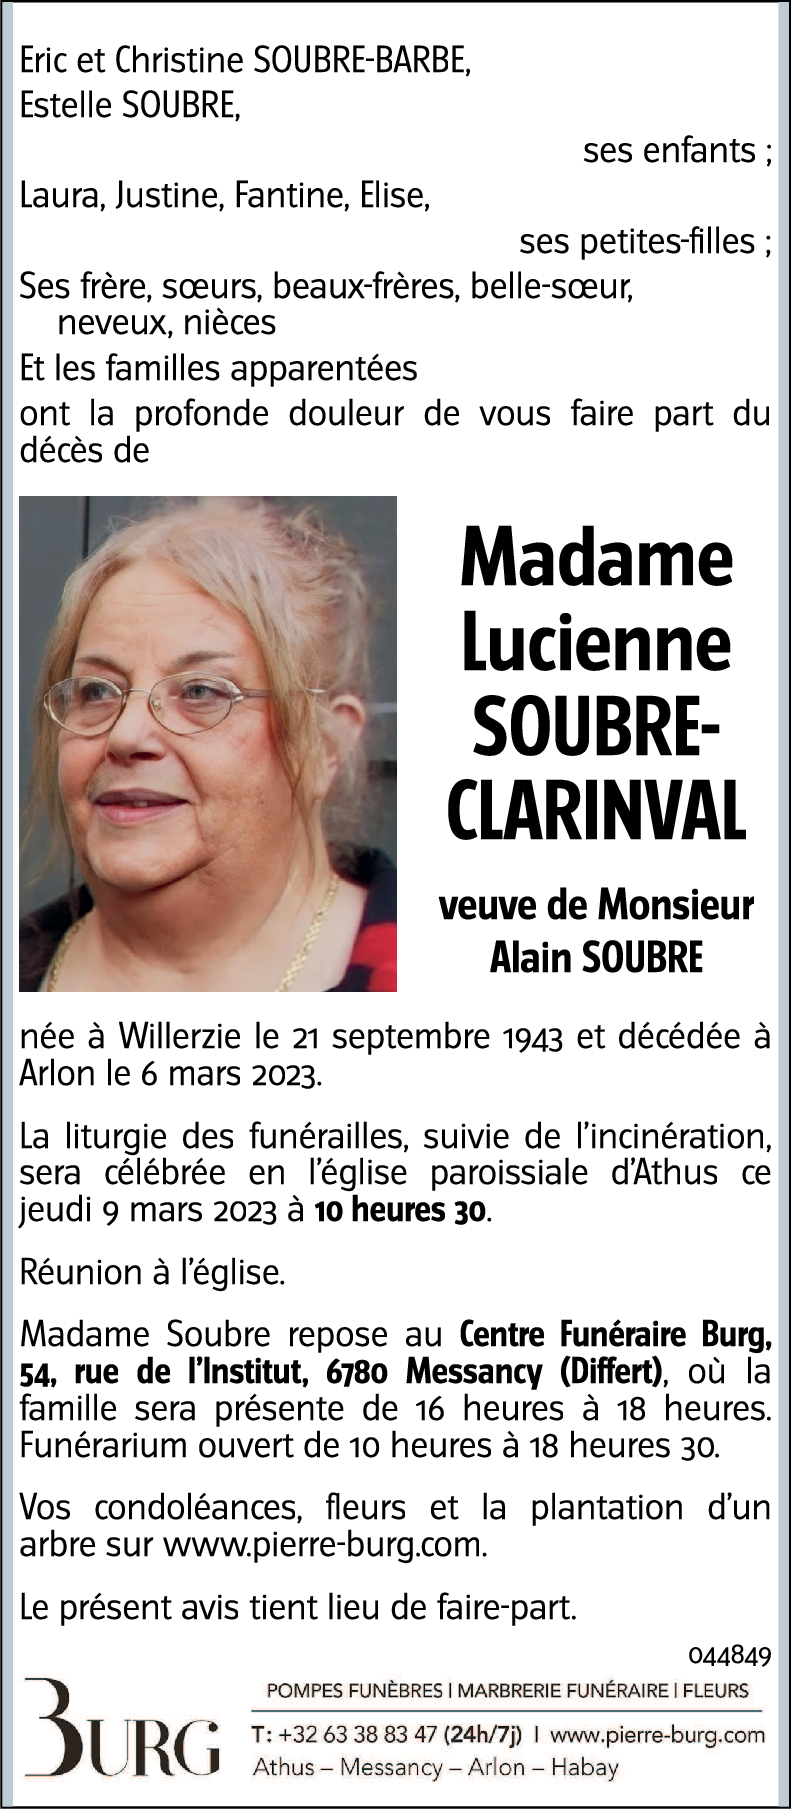 Lucienne SOUBRE-CLARINVAL